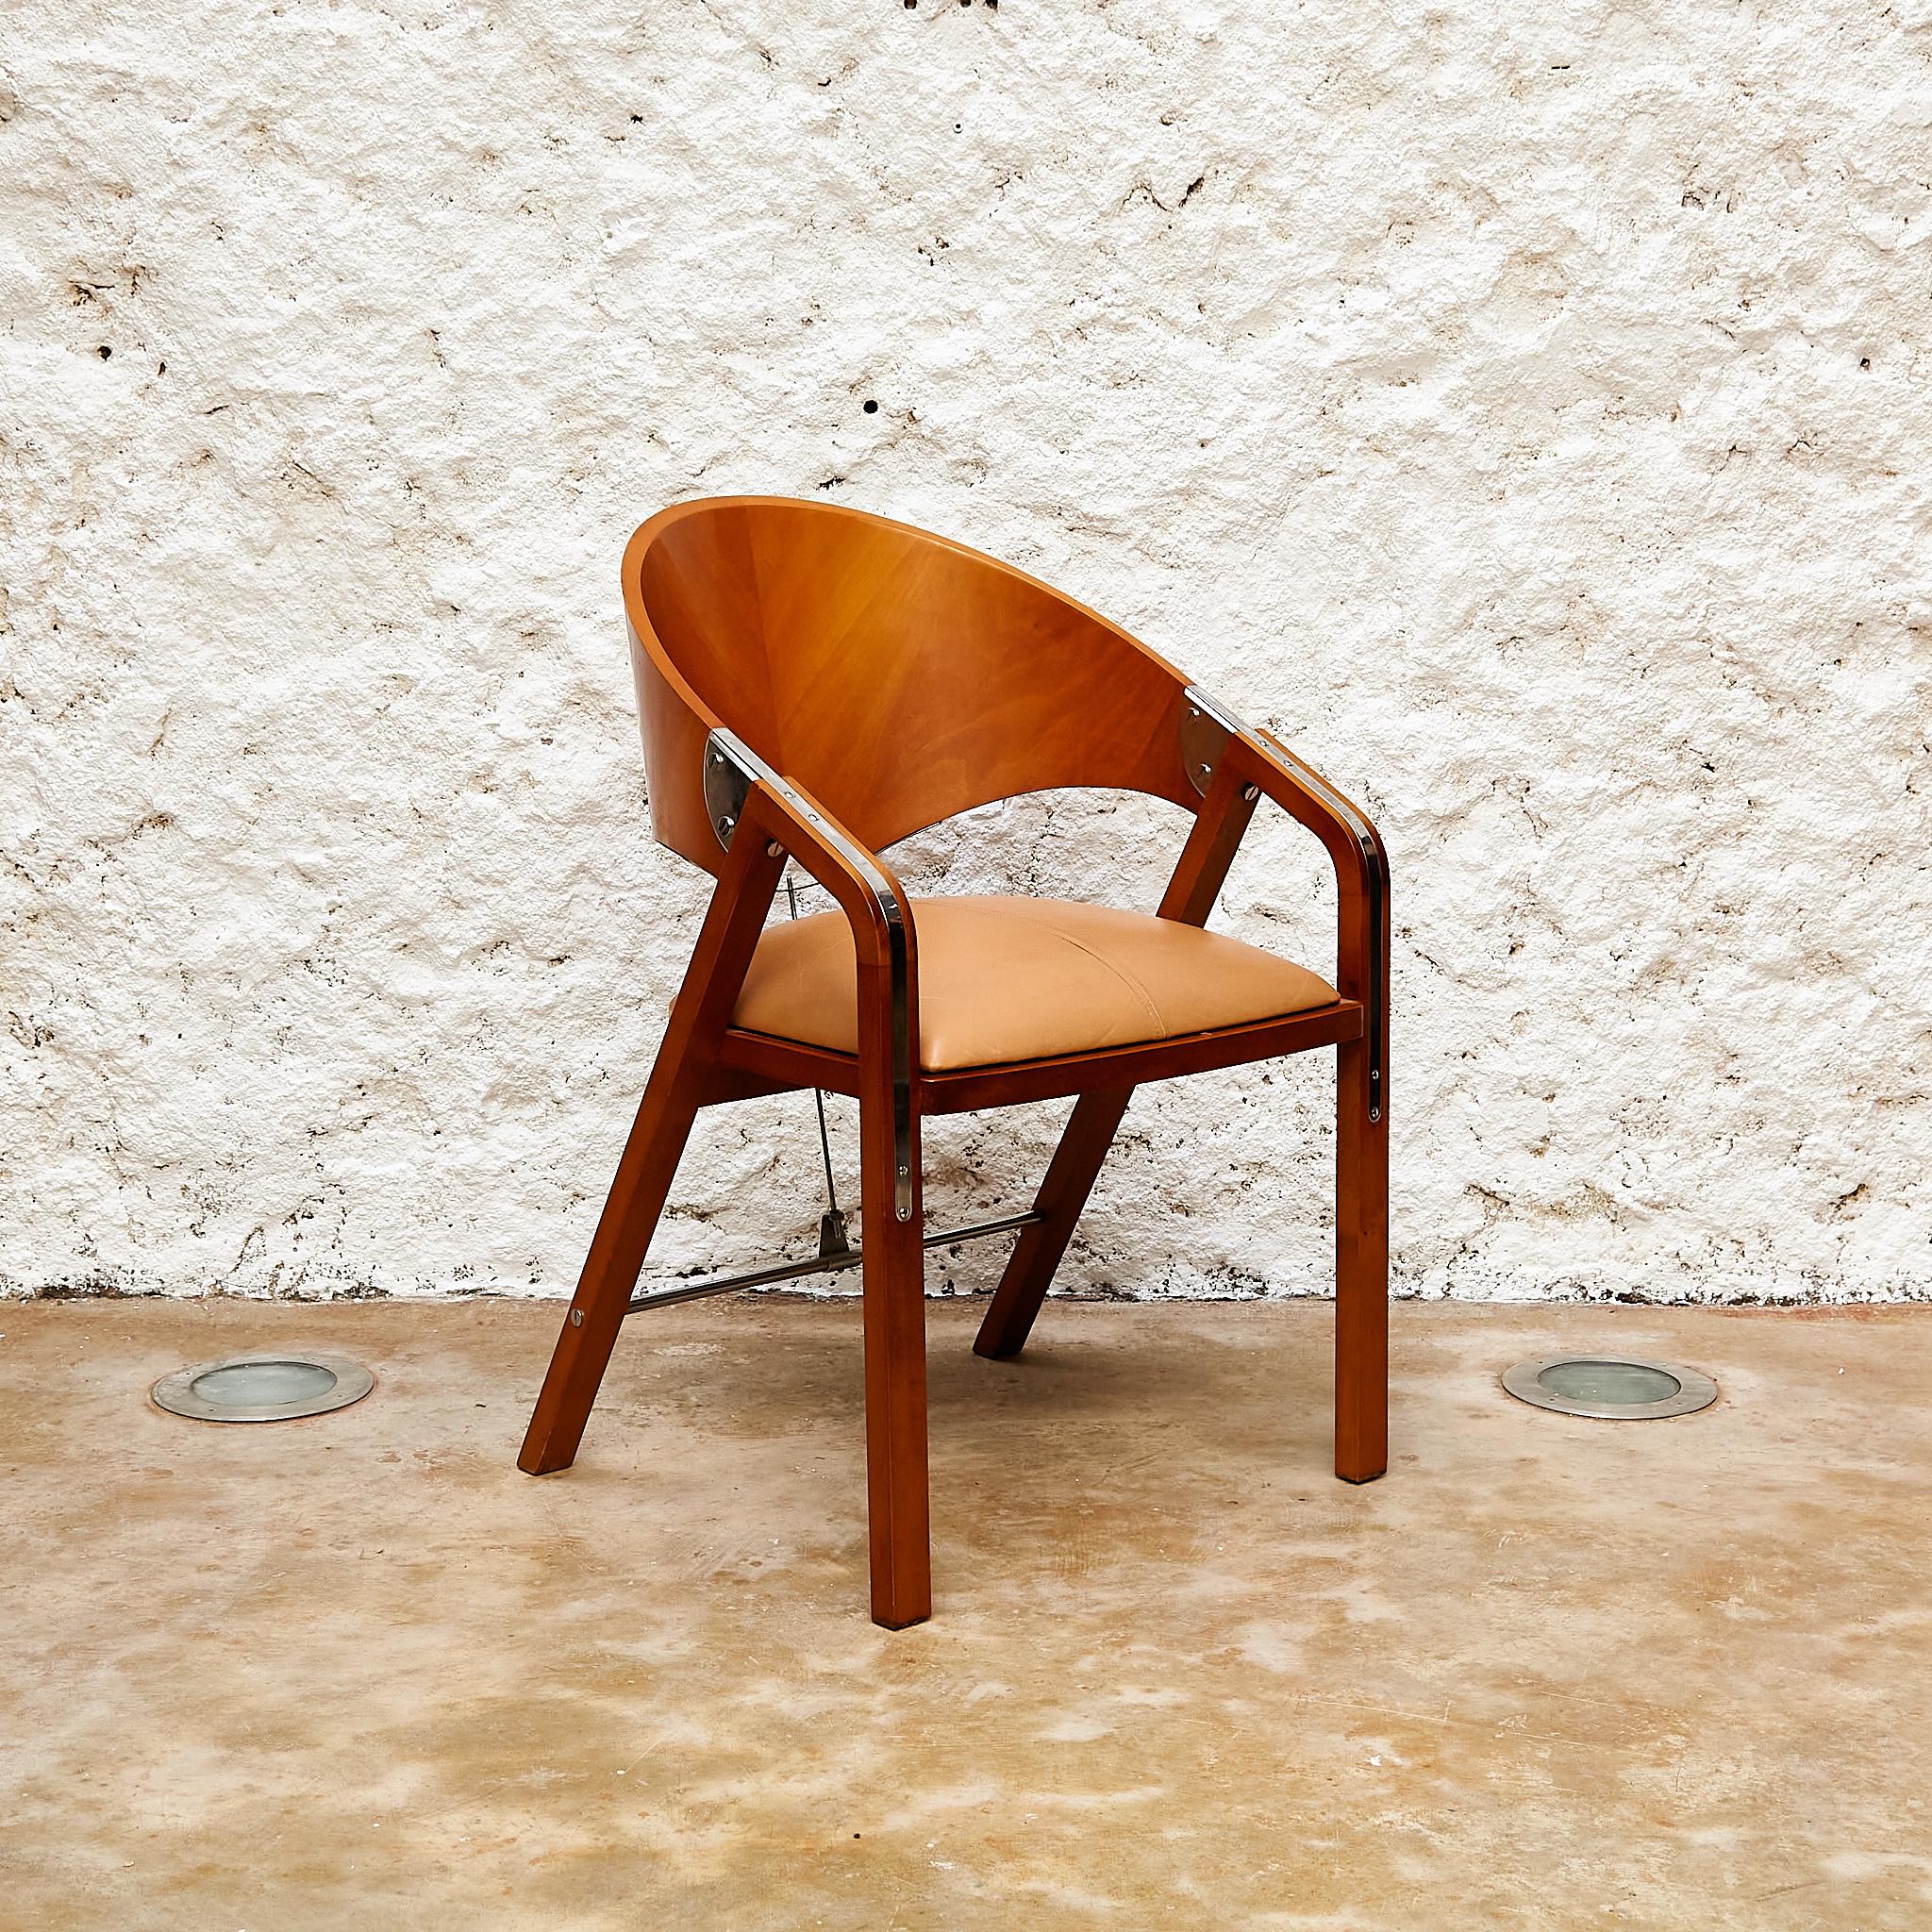 The Vintage 'Spinnaker' Chairs by Jamie Tresserra - Wood, Metal and Leather For Sale 13